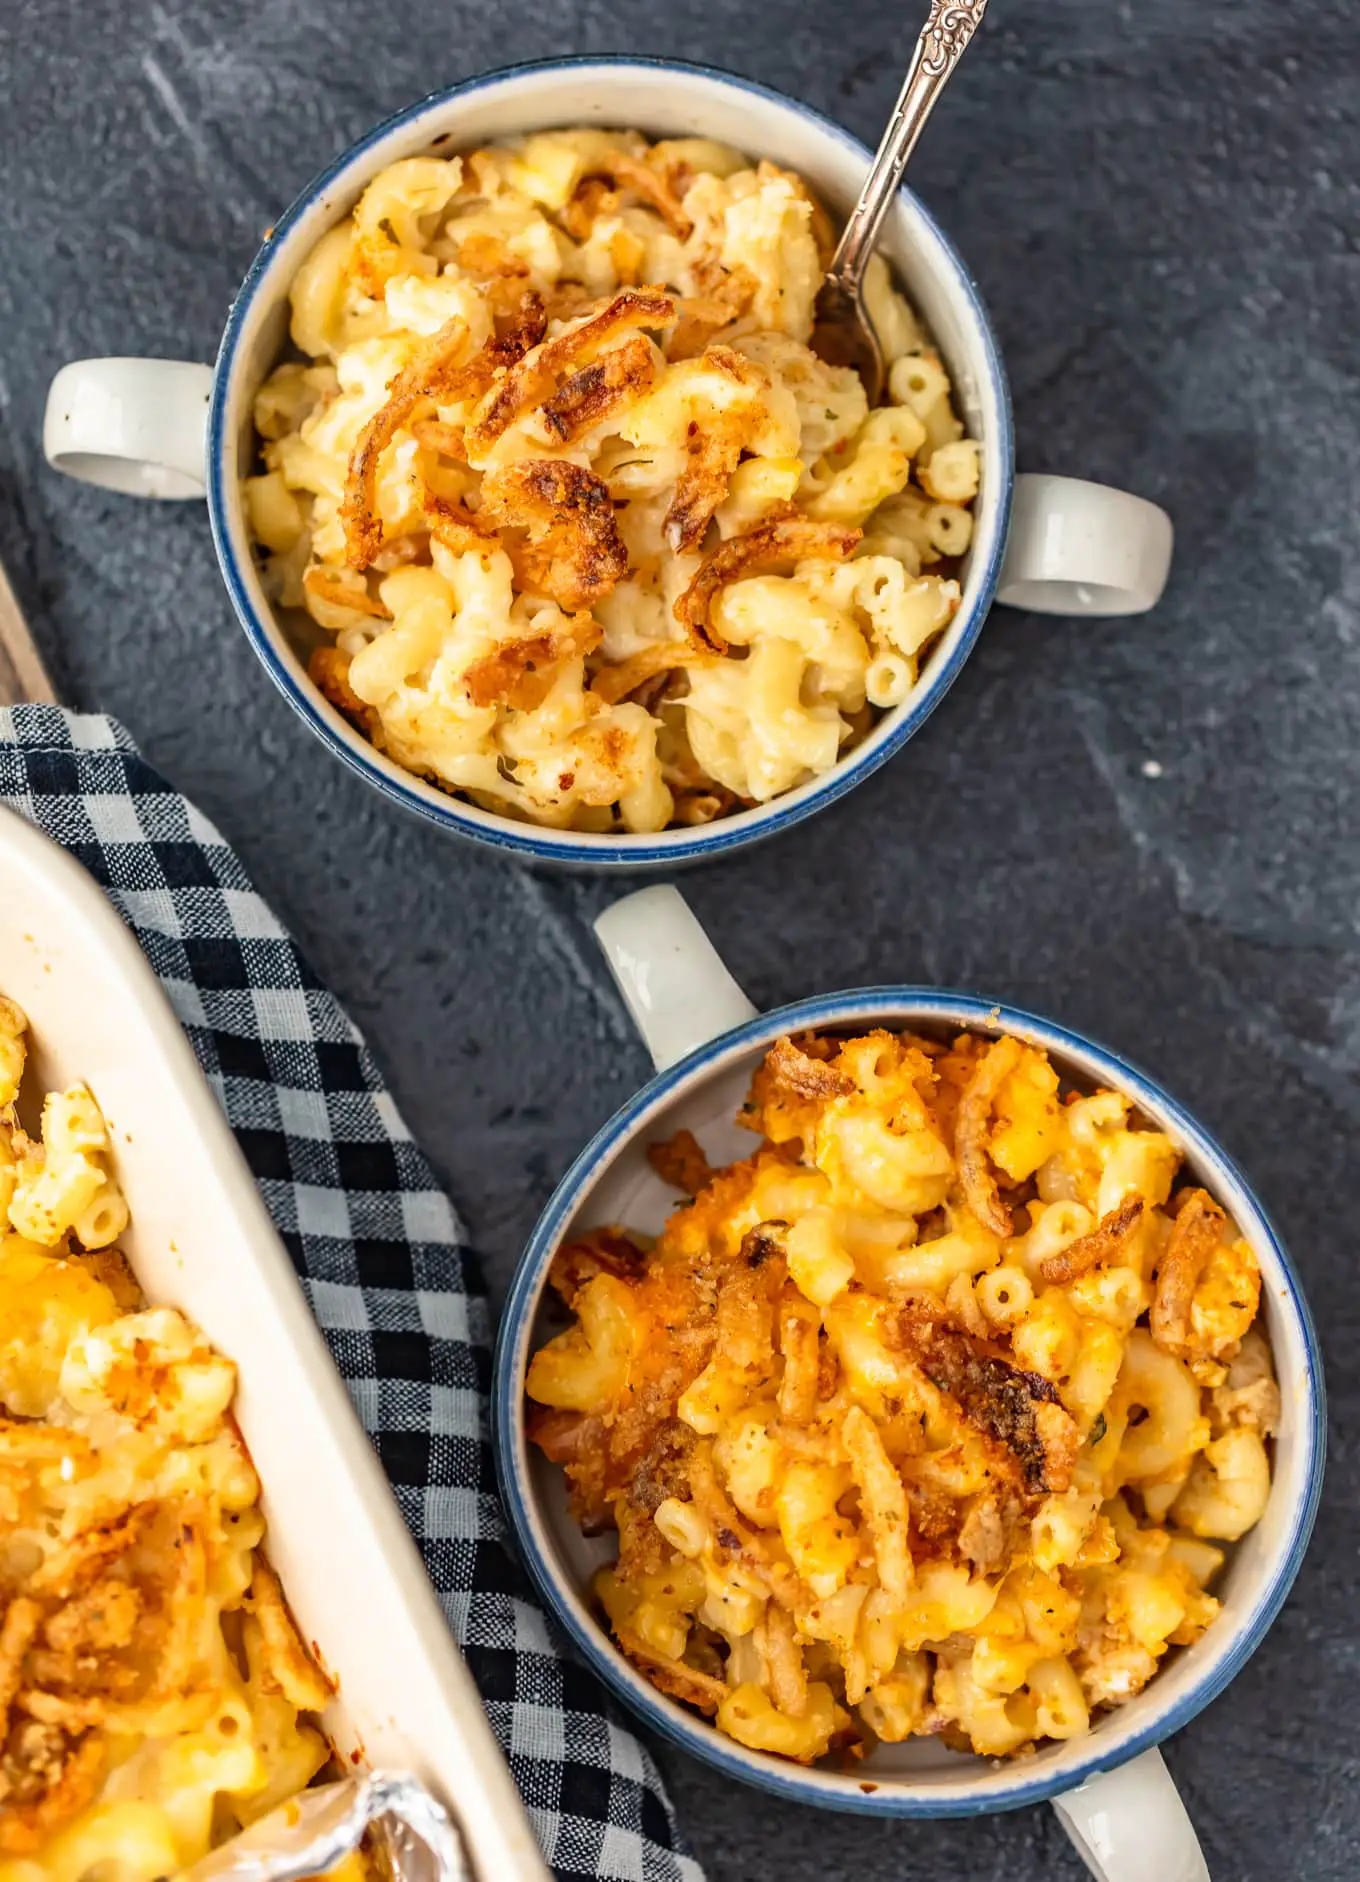 Baked Mac and Cheese Recipe 2 Ways {VIDEO}